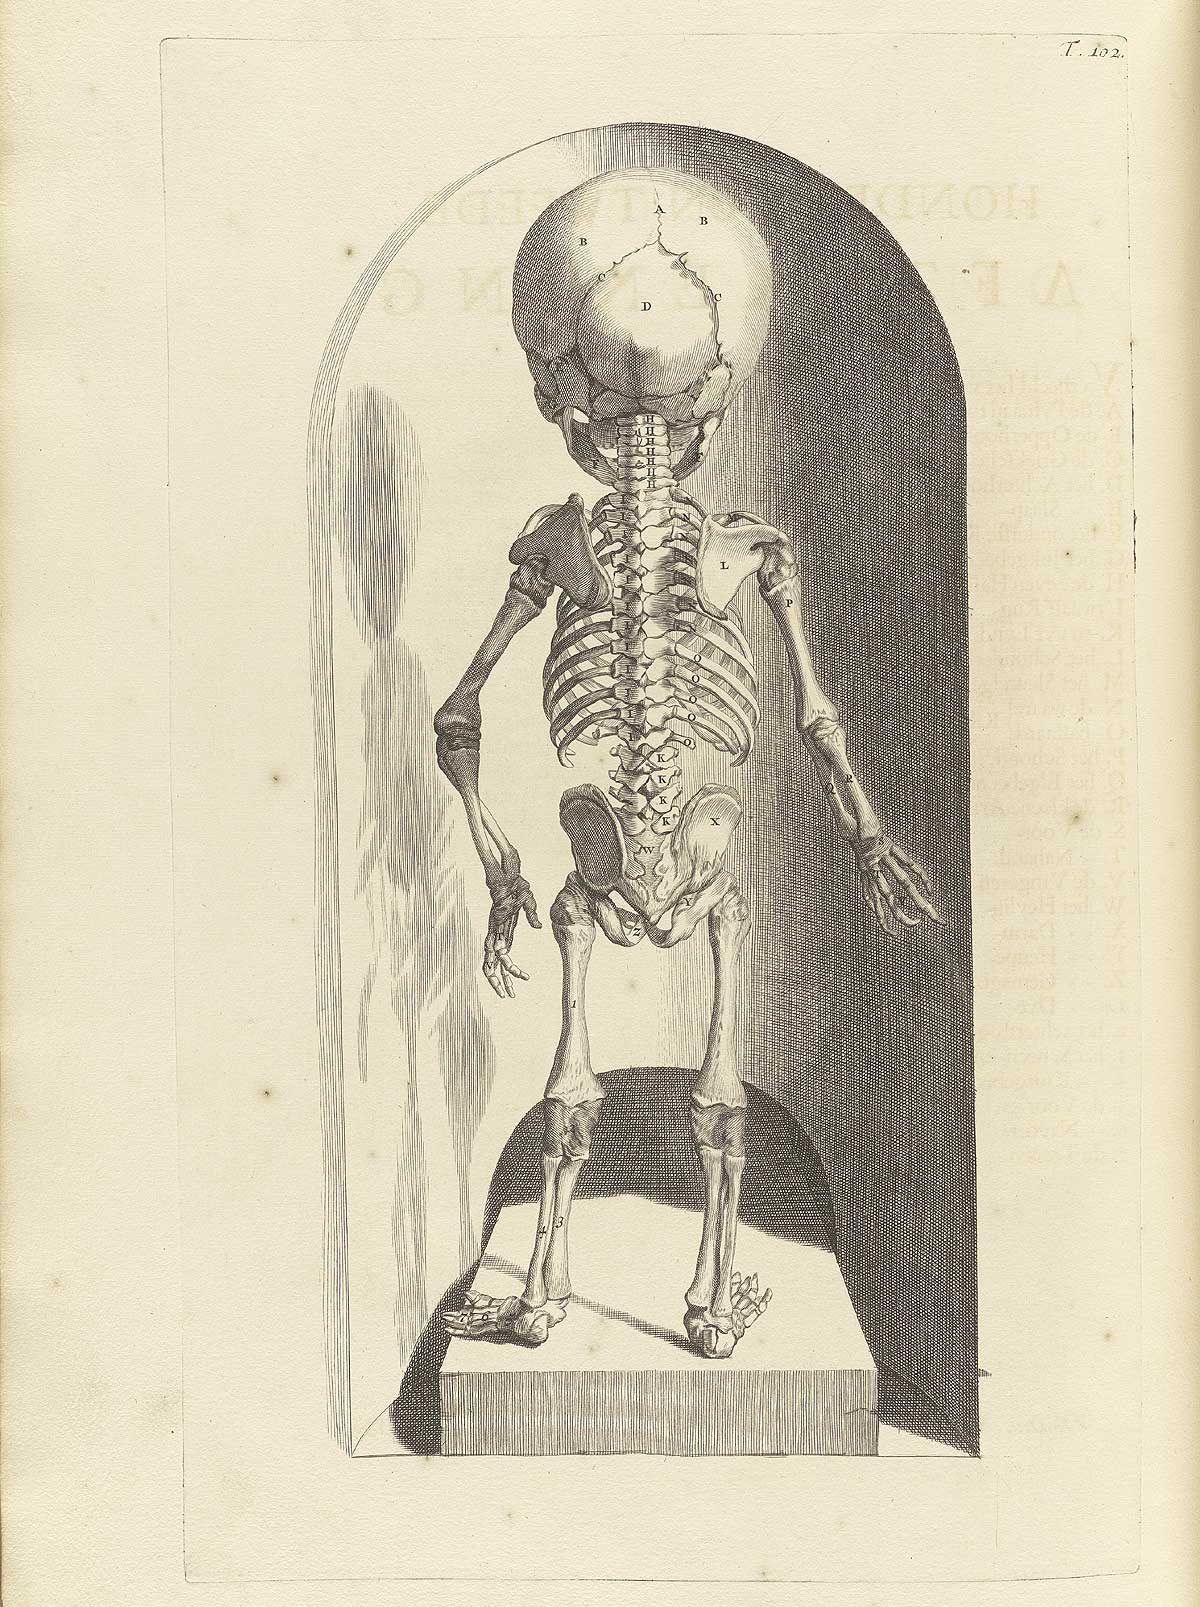 Engraving of a full fetal skeleton with its back to the viewer standing on a wooden plank in an alcove with a rounded top; from Govard Bidloo’s Ontleding Des Menschelyken Lichaams, Amsterdam, 1690, NLM Call no. WZ 250 B5855anDu 1690.